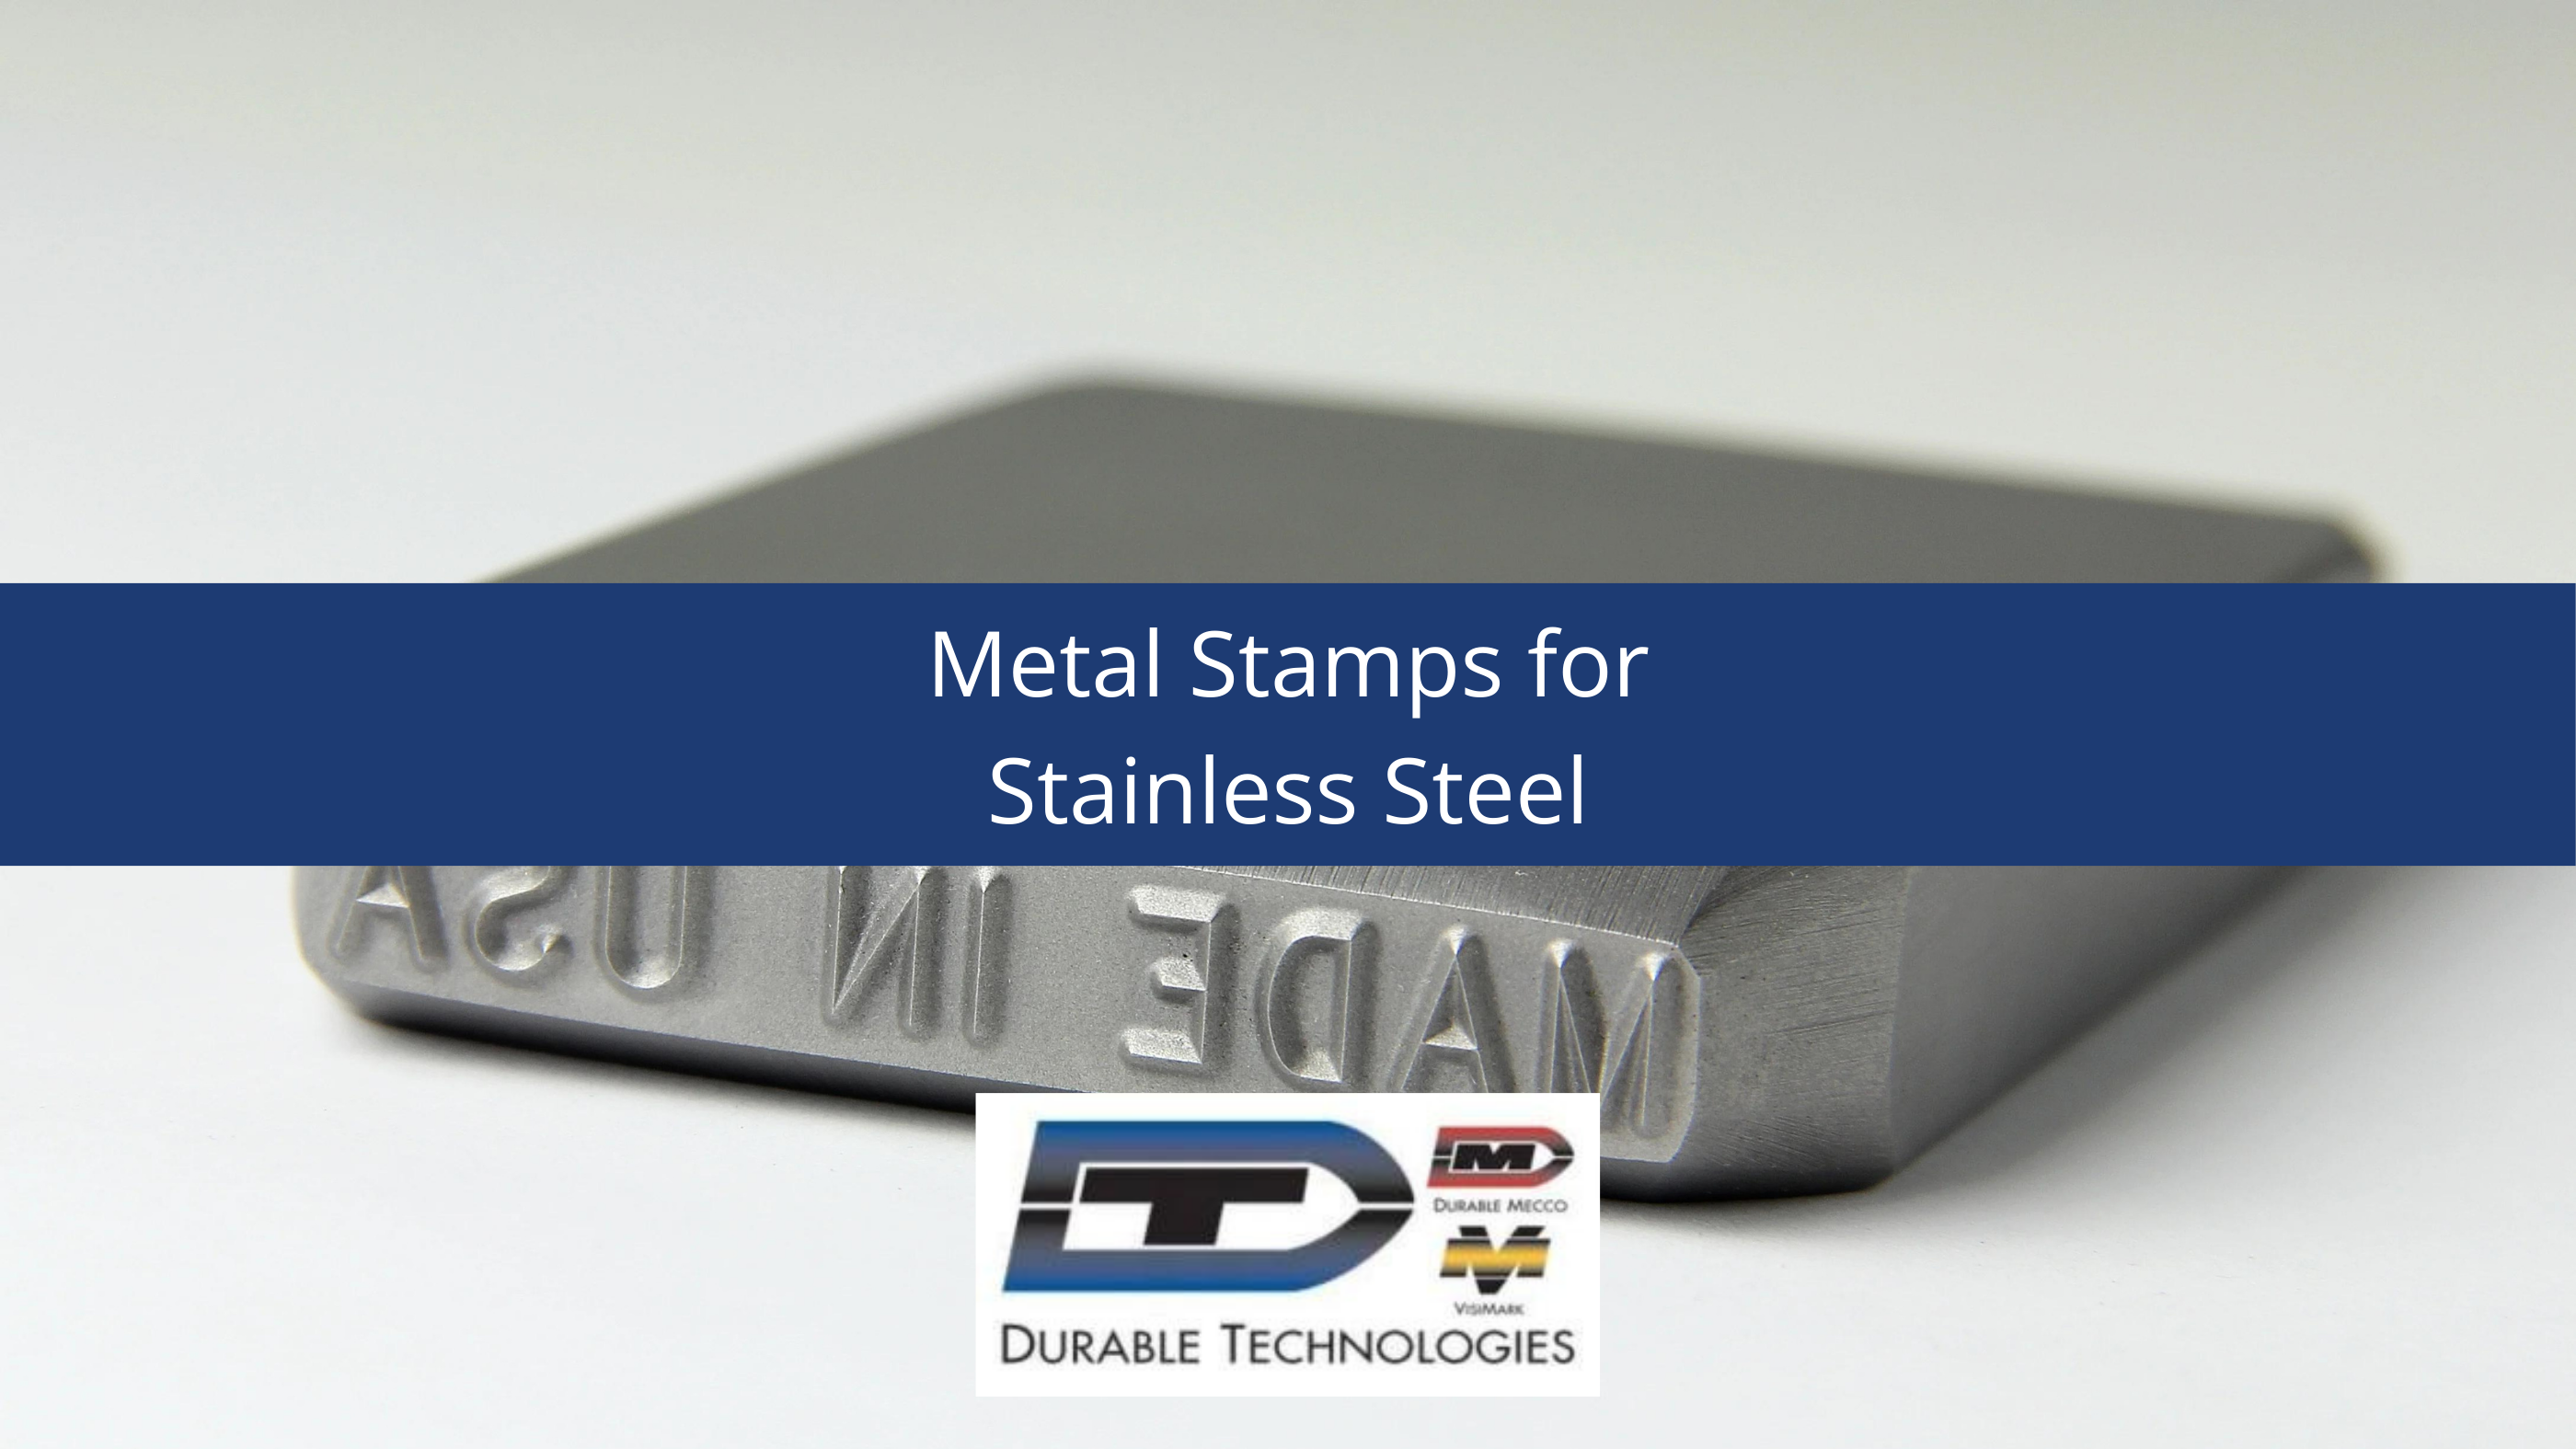 Metal Stamps for Stainless Steel